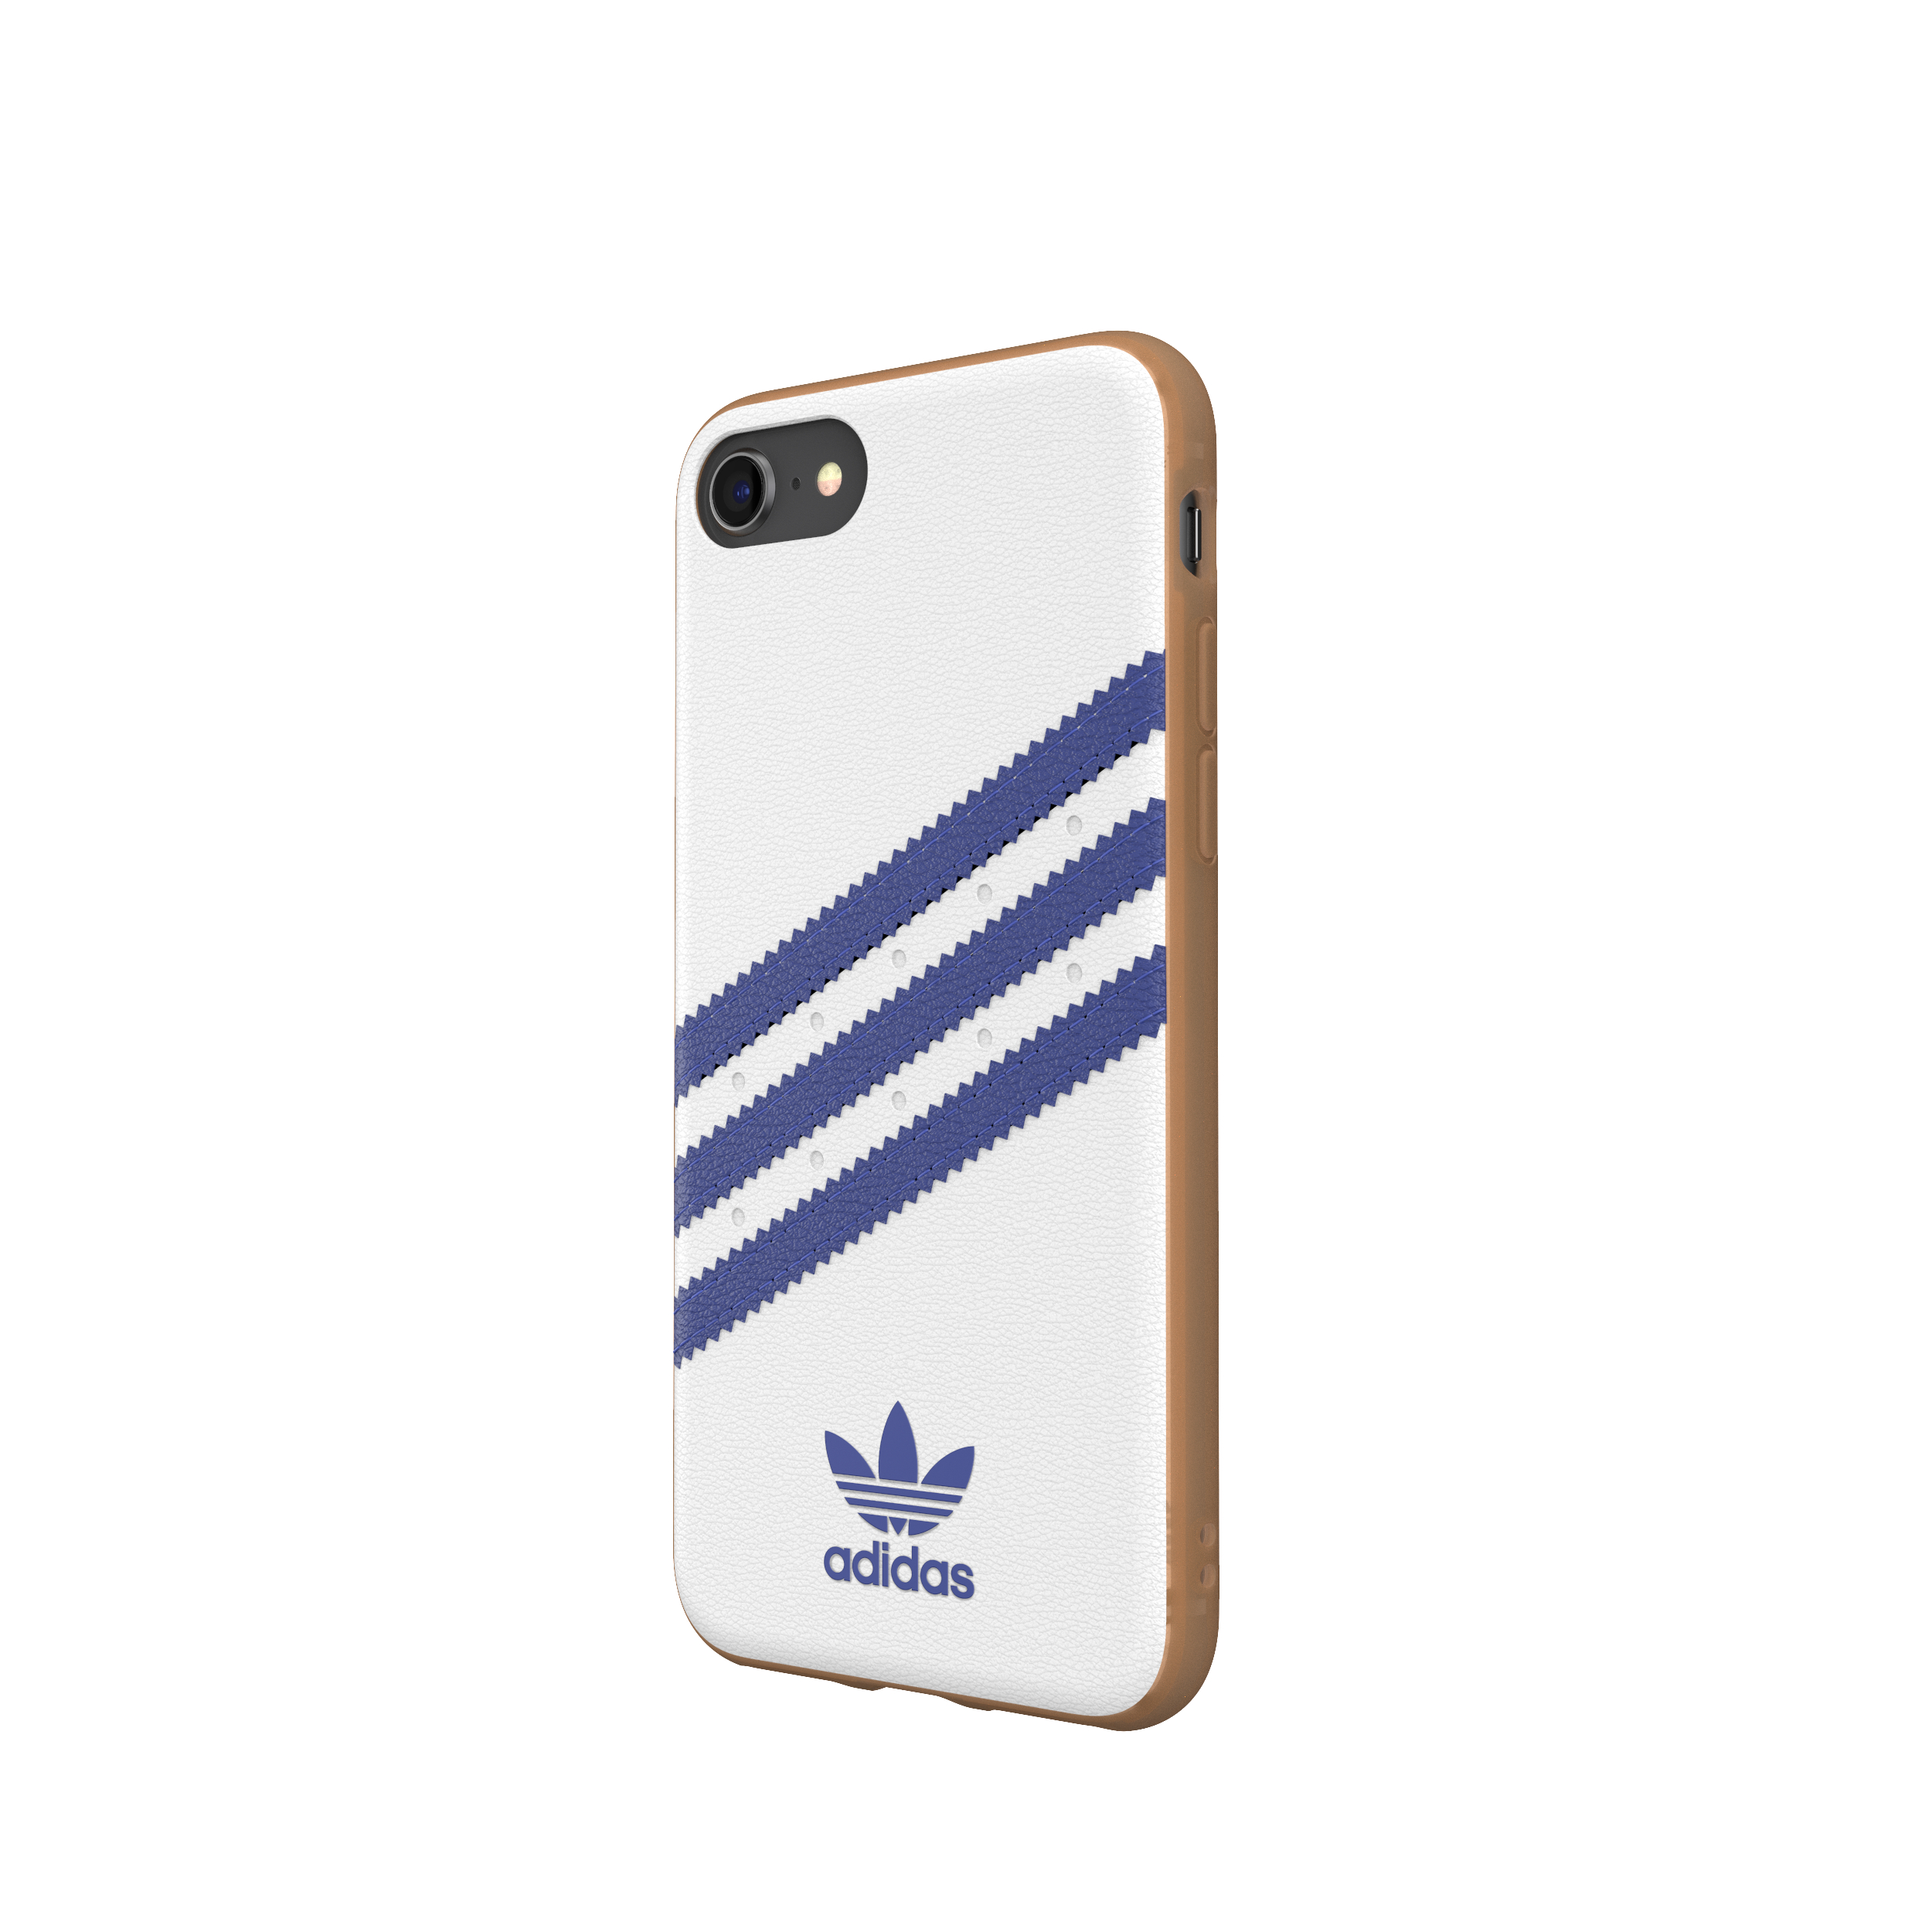 ADIDAS ORIGINALS Apple, OR (2020), 7, Moulded Weiß/Blau 8, Backcover, iPhone iPhone Case, iPhone SE 6, iPhone